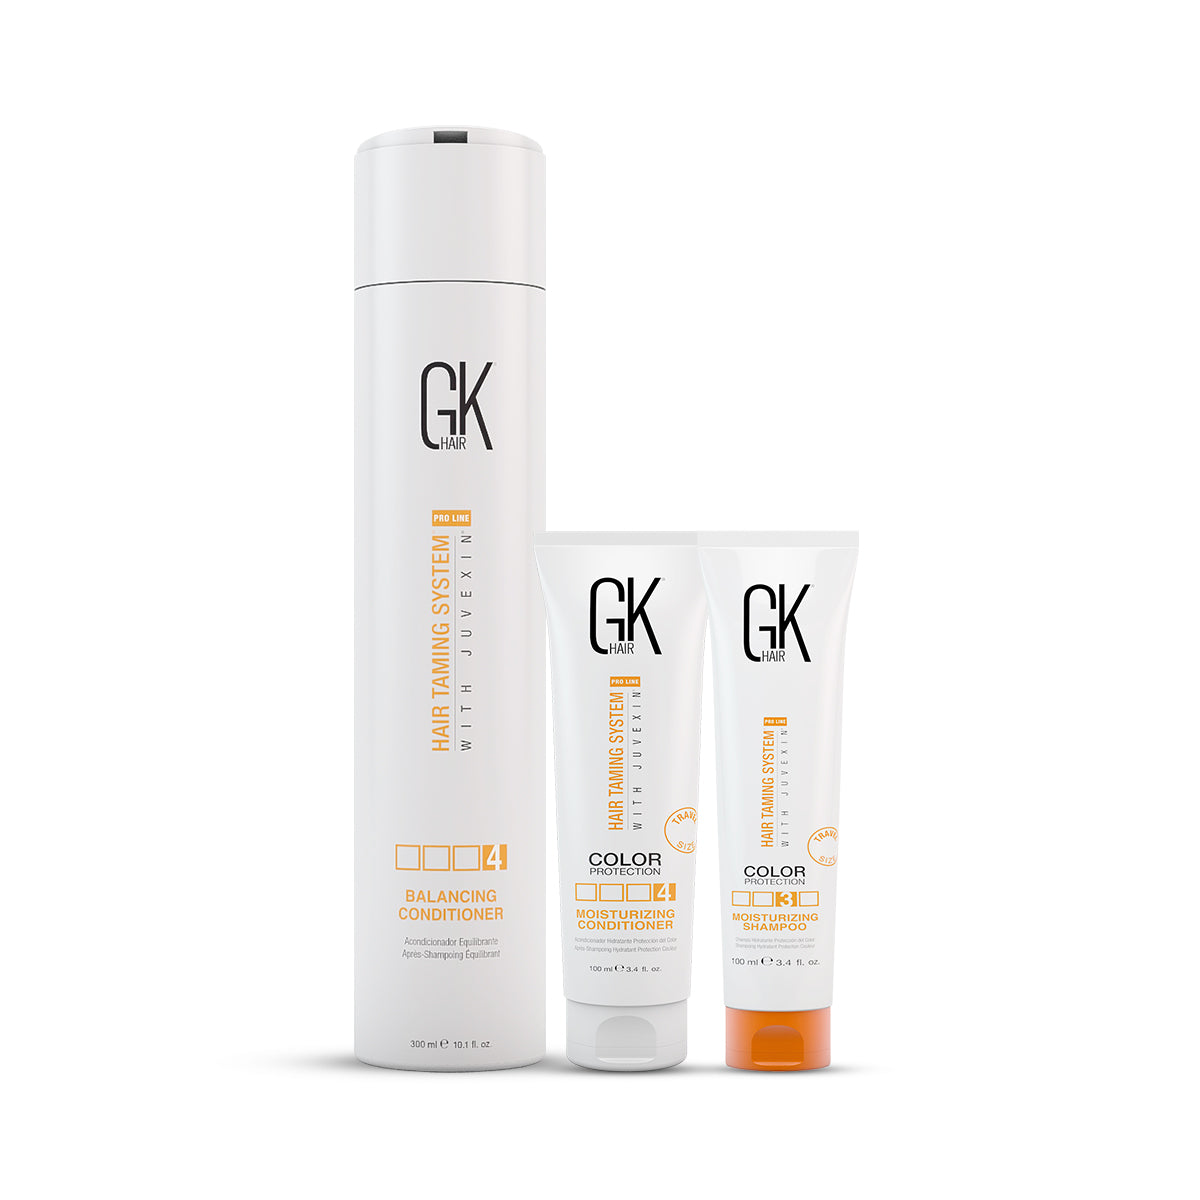 GK Hair Moisturizing Shampoo and Conditioner 100 Ml with Balancing Conditioner 300 Ml